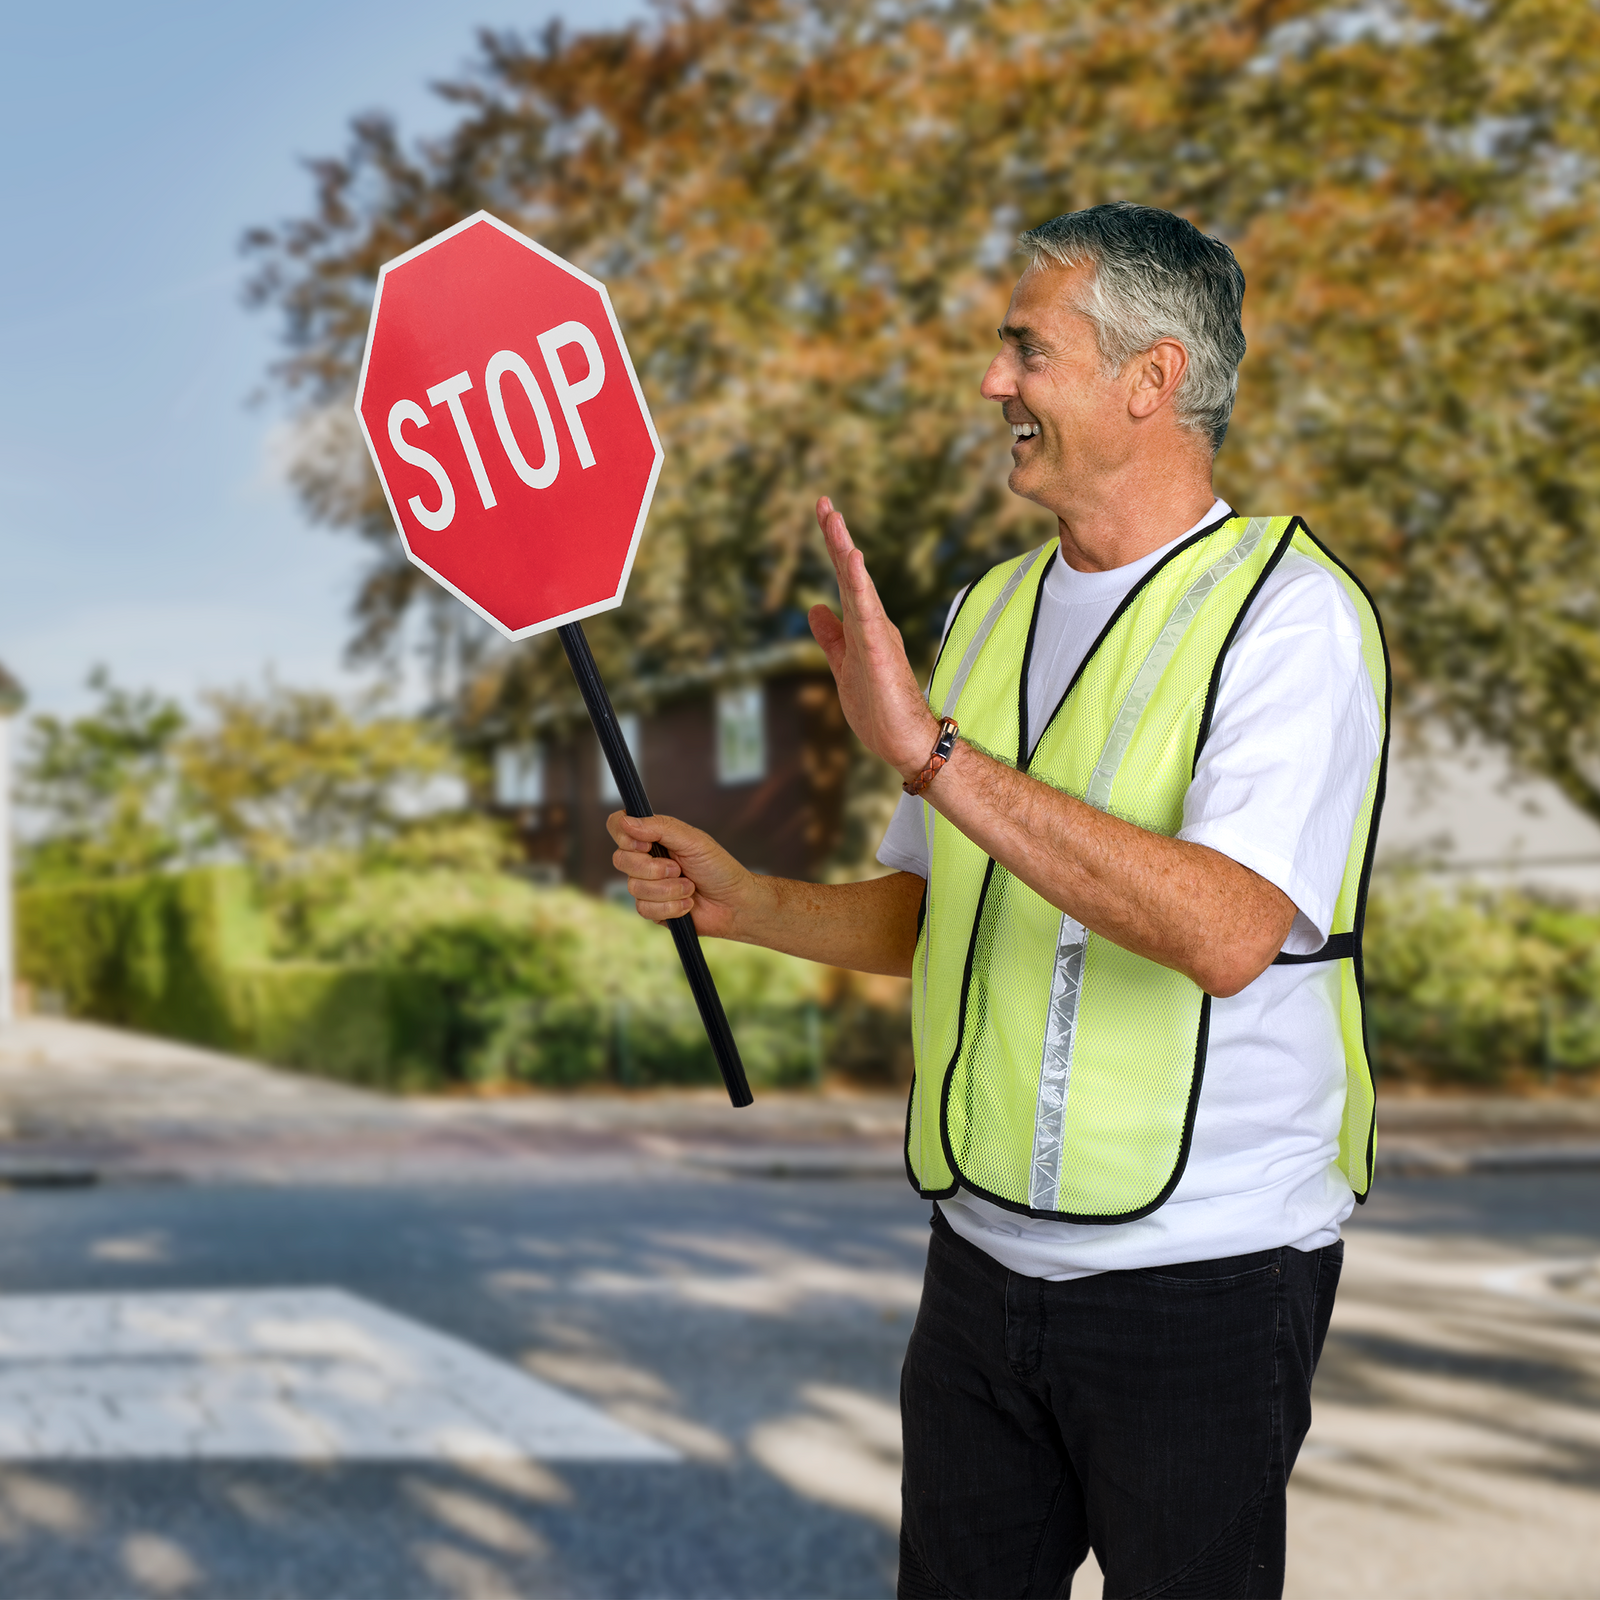 Worker wearing the lime reflective safety vest while directing traffic in a school area